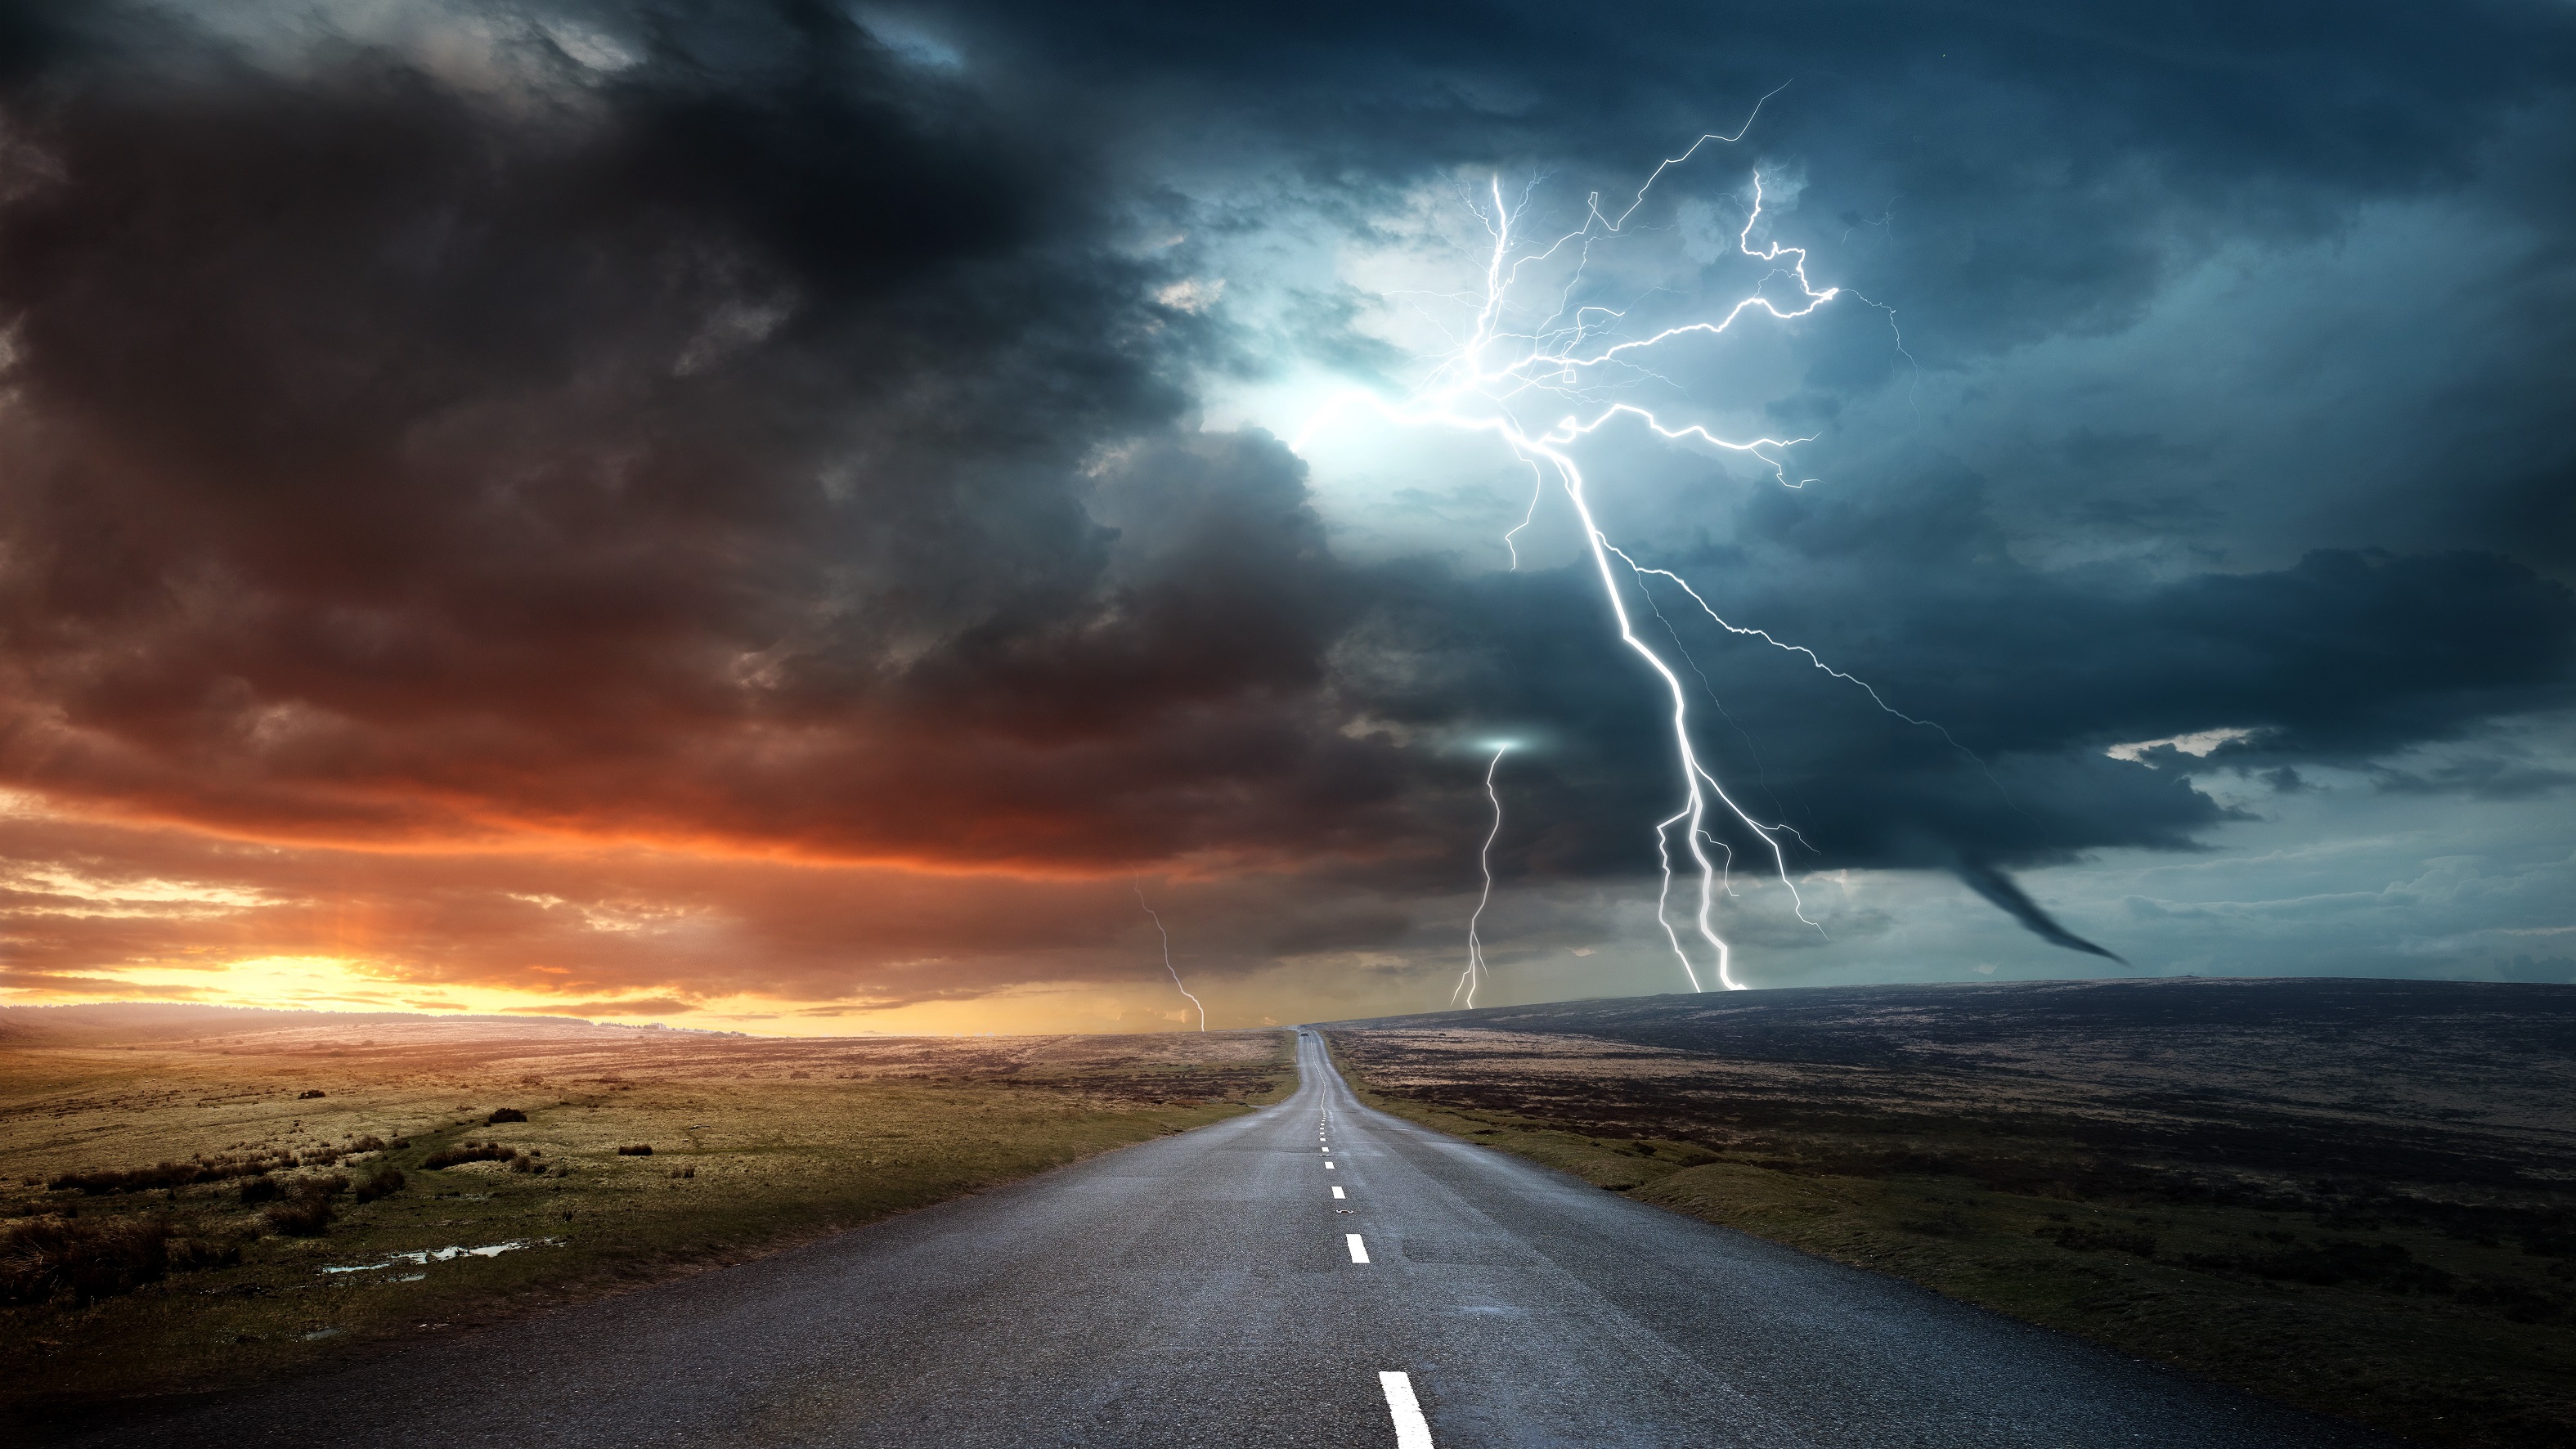 storm ahead trouble road sky thunder cloud weather